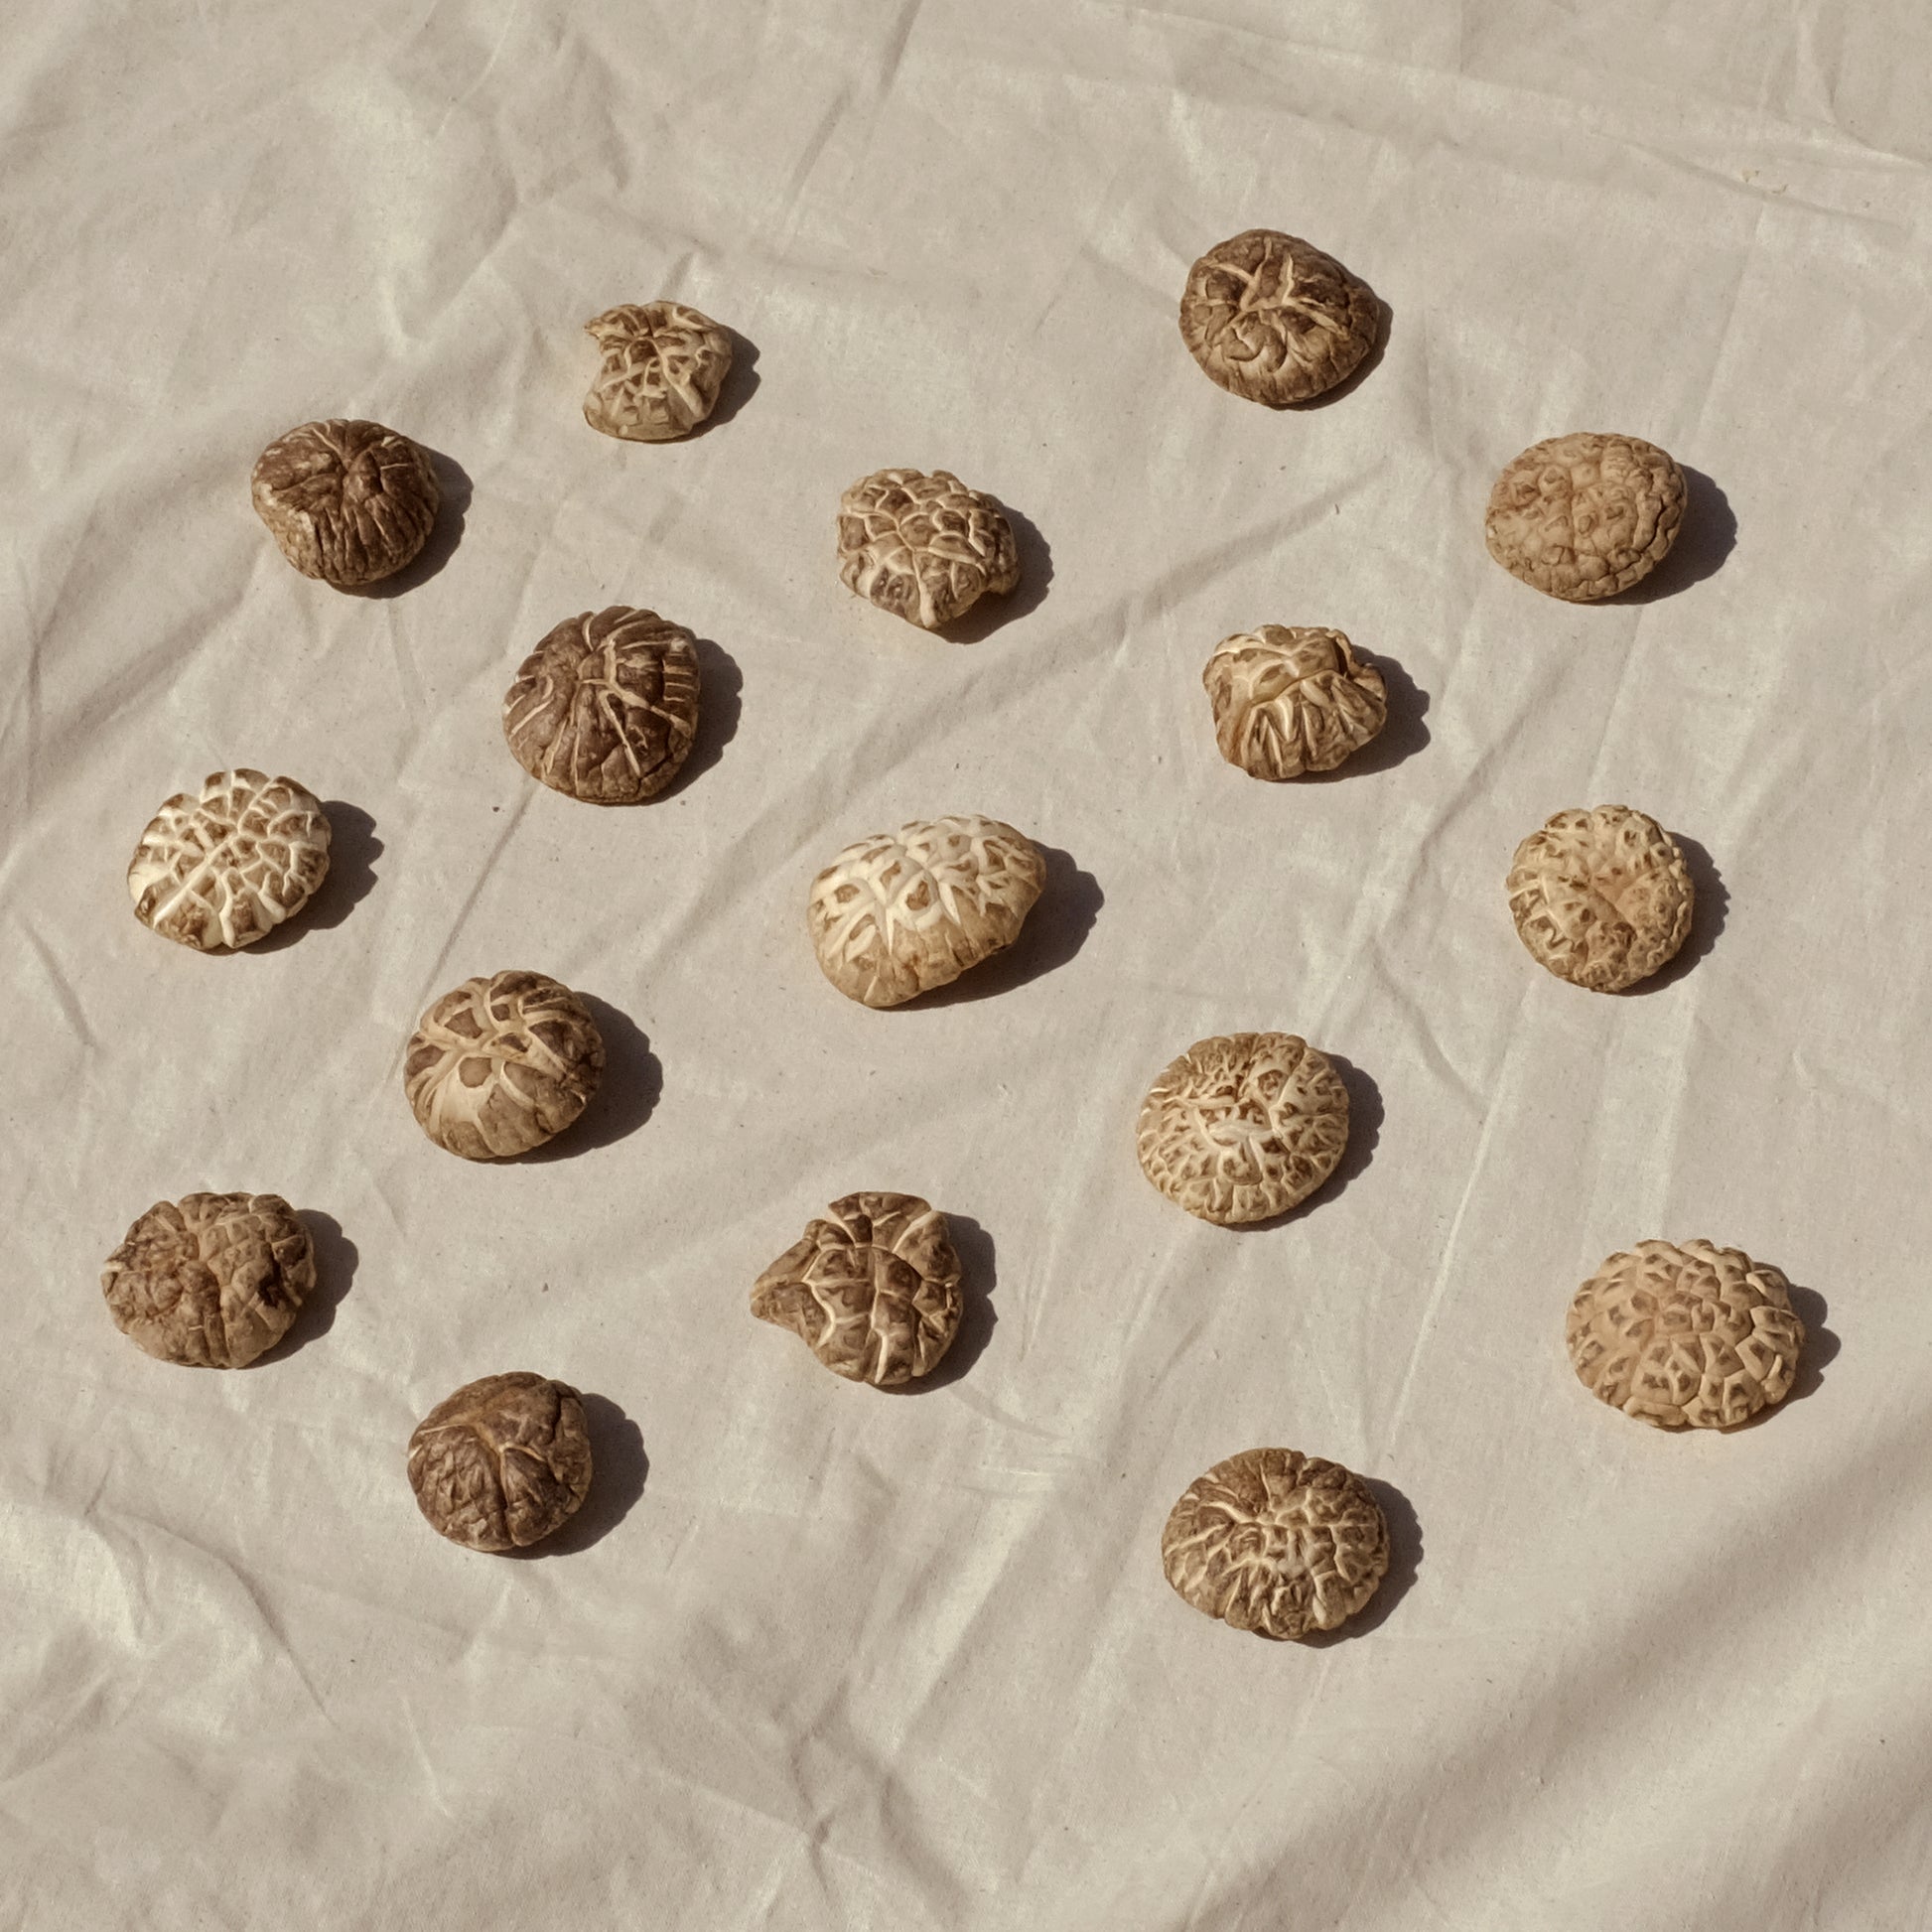 Shiitake mushrooms laid out evenly. Image 2